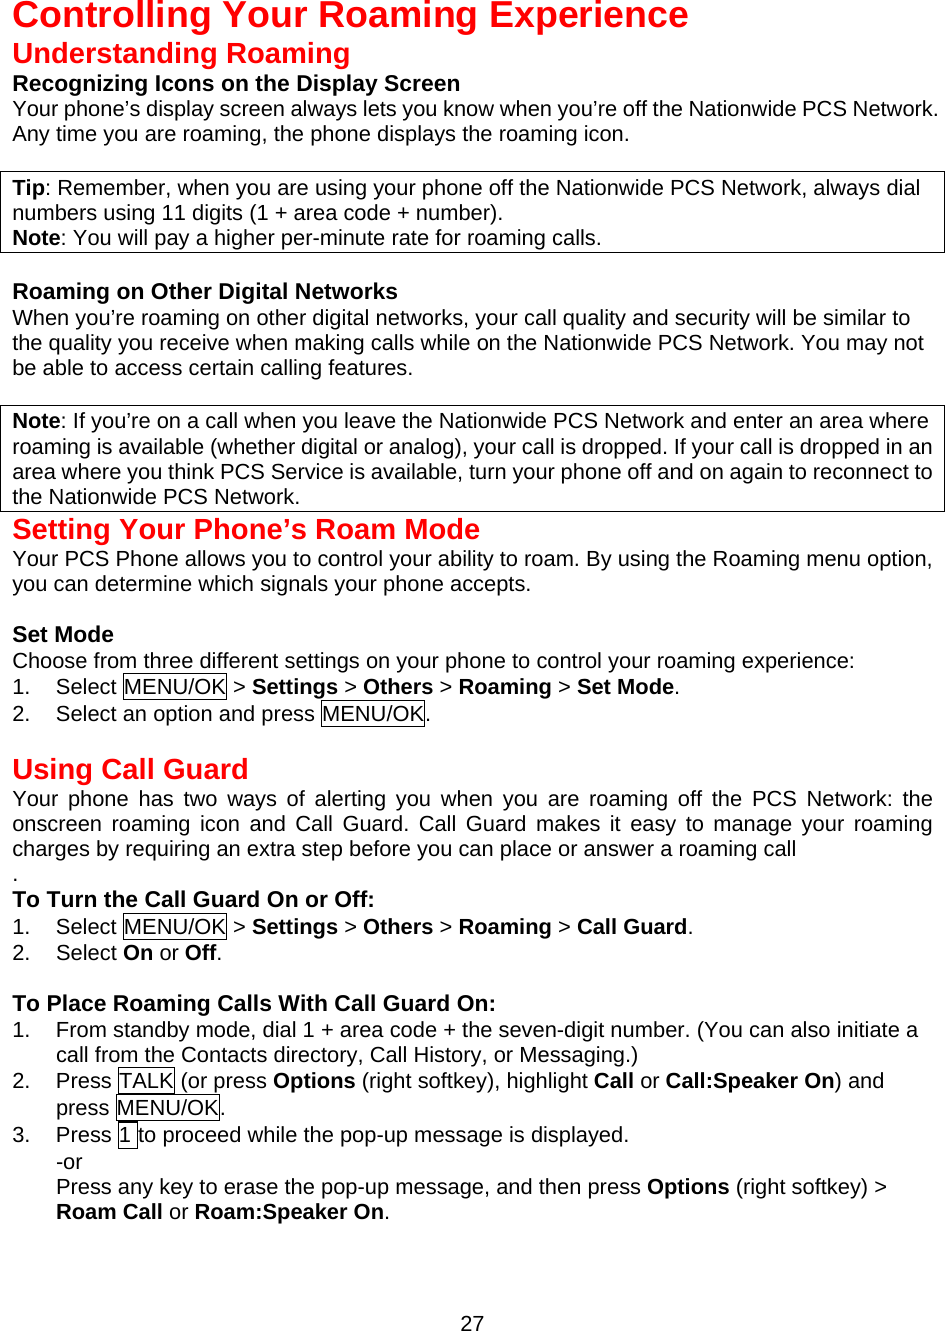  27  Controlling Your Roaming Experience Understanding Roaming Recognizing Icons on the Display Screen Your phone’s display screen always lets you know when you’re off the Nationwide PCS Network.   Any time you are roaming, the phone displays the roaming icon.  Tip: Remember, when you are using your phone off the Nationwide PCS Network, always dial numbers using 11 digits (1 + area code + number). Note: You will pay a higher per-minute rate for roaming calls.  Roaming on Other Digital Networks When you’re roaming on other digital networks, your call quality and security will be similar to the quality you receive when making calls while on the Nationwide PCS Network. You may not be able to access certain calling features.  Note: If you’re on a call when you leave the Nationwide PCS Network and enter an area where roaming is available (whether digital or analog), your call is dropped. If your call is dropped in an area where you think PCS Service is available, turn your phone off and on again to reconnect to the Nationwide PCS Network. Setting Your Phone’s Roam Mode Your PCS Phone allows you to control your ability to roam. By using the Roaming menu option, you can determine which signals your phone accepts.  Set Mode Choose from three different settings on your phone to control your roaming experience: 1. Select MENU/OK &gt; Settings &gt; Others &gt; Roaming &gt; Set Mode. 2.  Select an option and press MENU/OK.   Using Call Guard Your phone has two ways of alerting you when you are roaming off the PCS Network: the onscreen roaming icon and Call Guard. Call Guard makes it easy to manage your roaming charges by requiring an extra step before you can place or answer a roaming call . To Turn the Call Guard On or Off: 1. Select MENU/OK &gt; Settings &gt; Others &gt; Roaming &gt; Call Guard. 2. Select On or Off.  To Place Roaming Calls With Call Guard On: 1.  From standby mode, dial 1 + area code + the seven-digit number. (You can also initiate a call from the Contacts directory, Call History, or Messaging.) 2. Press TALK (or press Options (right softkey), highlight Call or Call:Speaker On) and press MENU/OK. 3.  Press 1 to proceed while the pop-up message is displayed.   -or Press any key to erase the pop-up message, and then press Options (right softkey) &gt; Roam Call or Roam:Speaker On. 